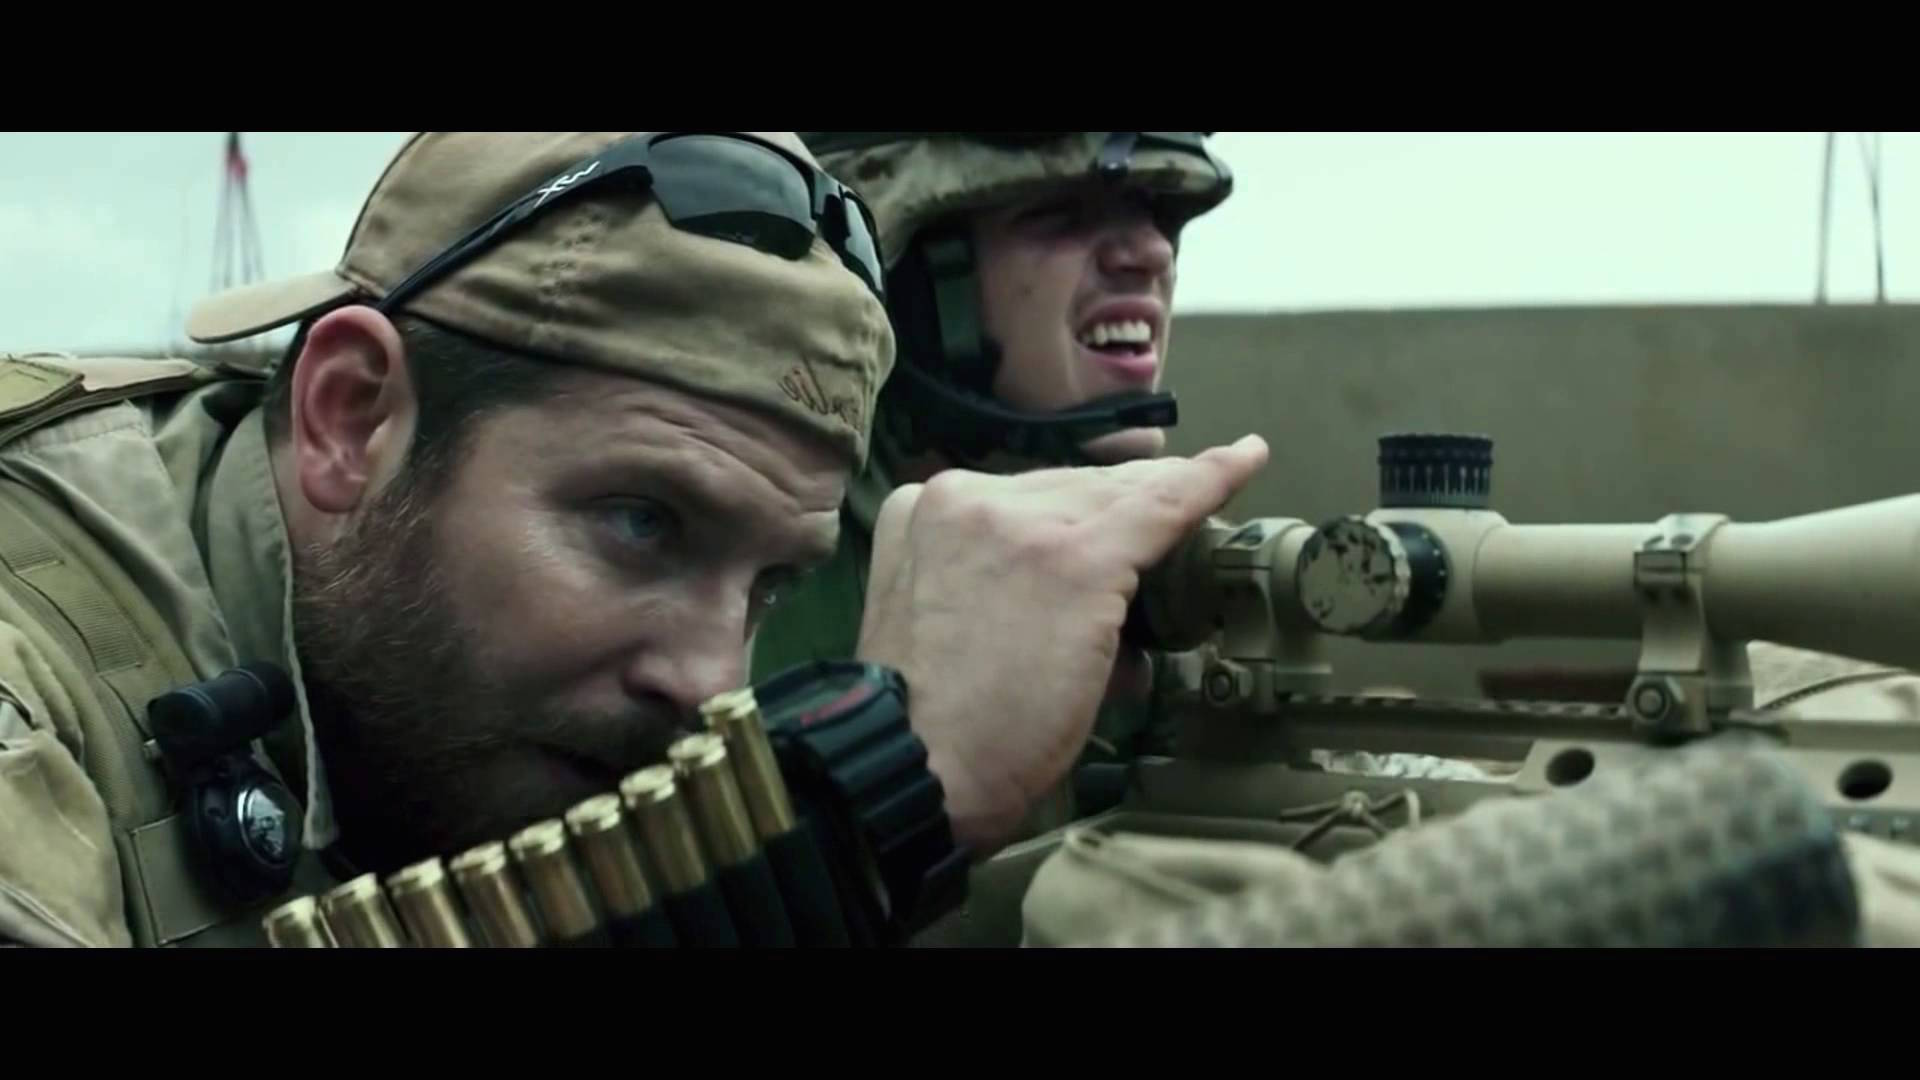 The AMERICAN SNIPER Blu-ray Steelbook is being released from Target in the US